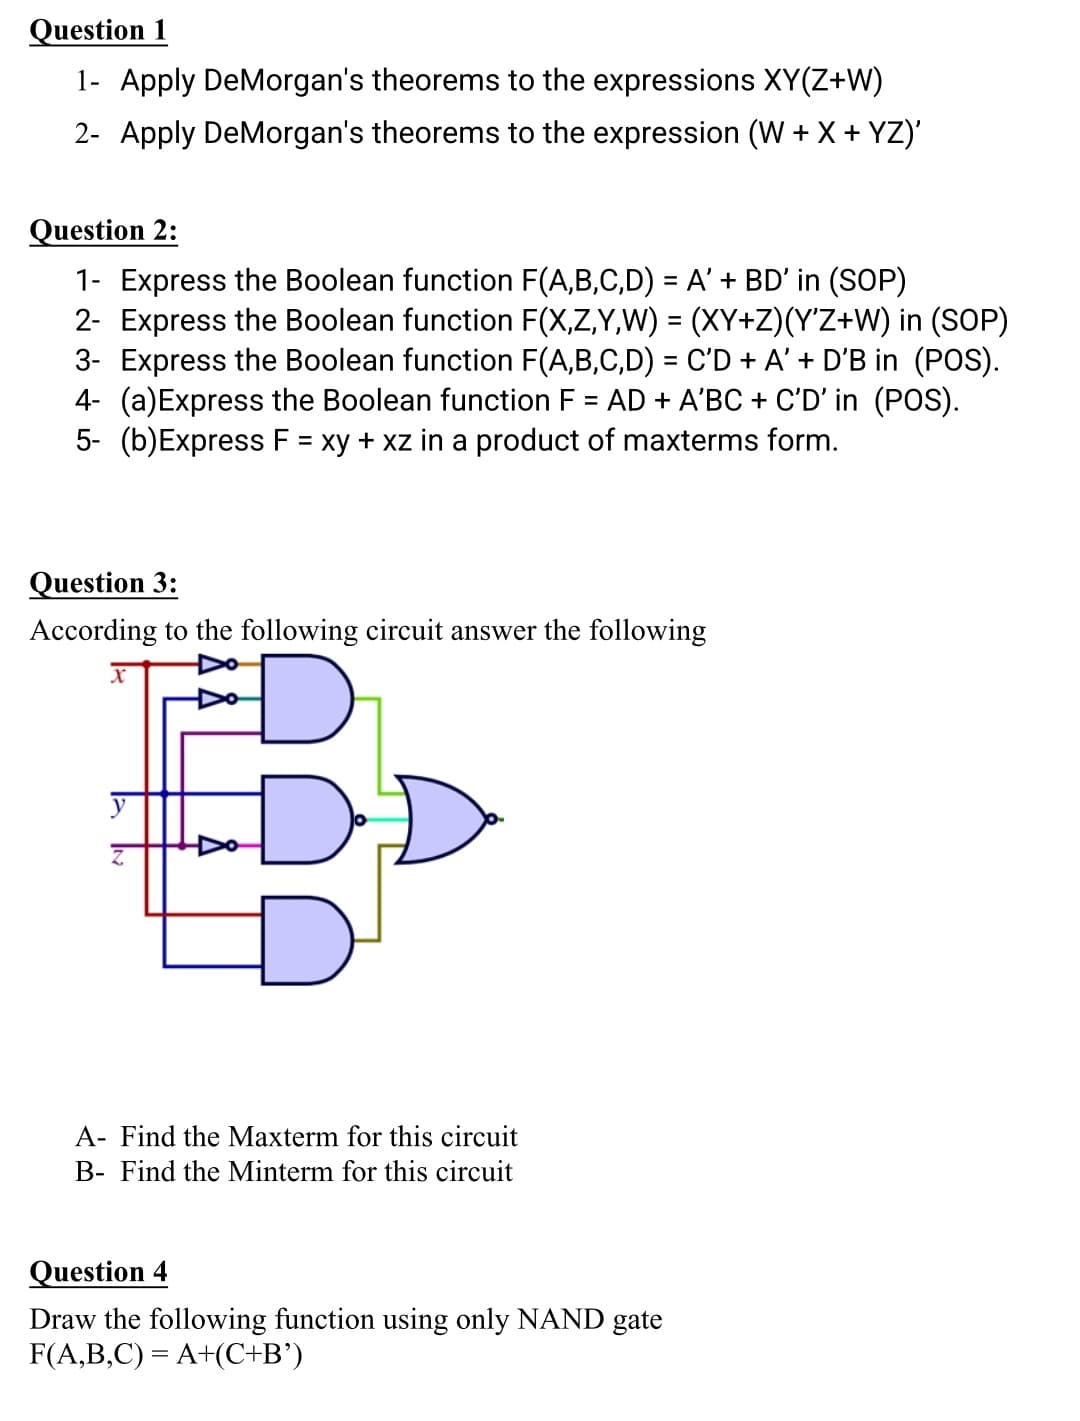 Question 1
1- Apply DeMorgan's theorems to the expressions XY(Z+W)
2- Apply DeMorgan's theorems to the expression (W + X + YZ)'
Question 2:
1- Express the Boolean function F(A,B,C,D) = A' + BD' in (SOP)
2- Express the Boolean function F(X,Z,Y,W) = (XY+Z)(Y'Z+W) in (SOP)
3- Express the Boolean function F(A,B,C,D) = C'D + A' + D'B in (POS).
4- (a)Express the Boolean function F = AD + A'BC + C'D' in (POS).
5- (b)Express F = xy + xz in a product of maxterms form.
%3D
Question 3:
According to the following circuit answer the following
A- Find the Maxterm for this circuit
B- Find the Minterm for this circuit
Question 4
Draw the following function using only NAND gate
F(A,B,C) = A+(C+B')
